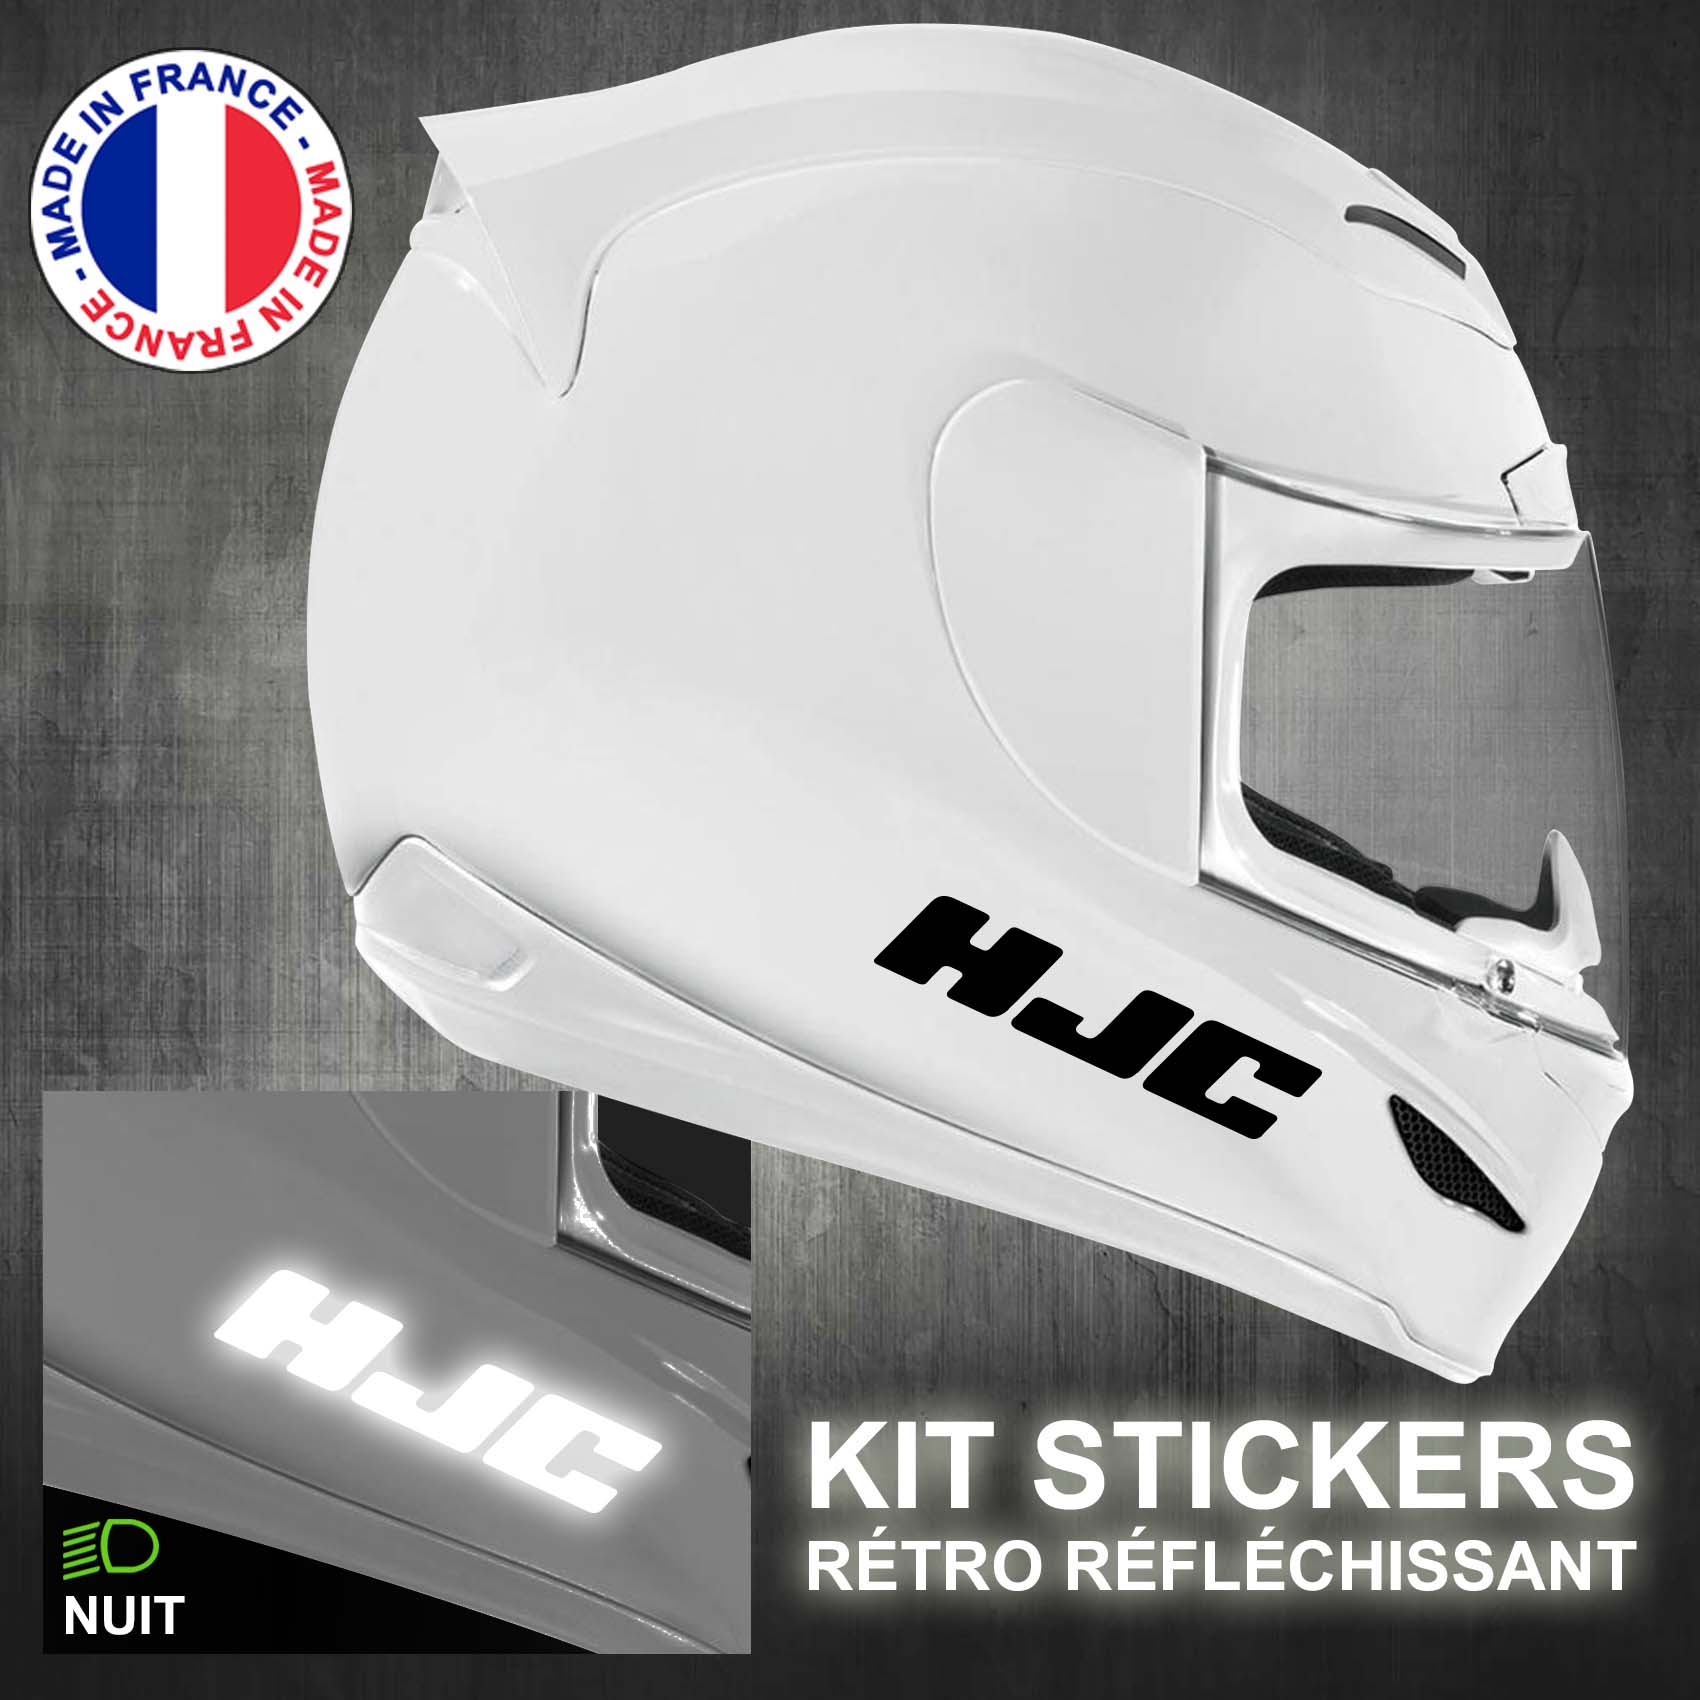 stickers-casque-moto-hjc-ref1-retro-reflechissant-autocollant-blanc-moto-velo-tuning-racing-route-sticker-casques-adhesif-scooter-nuit-securite-decals-personnalise-personnalisable-min